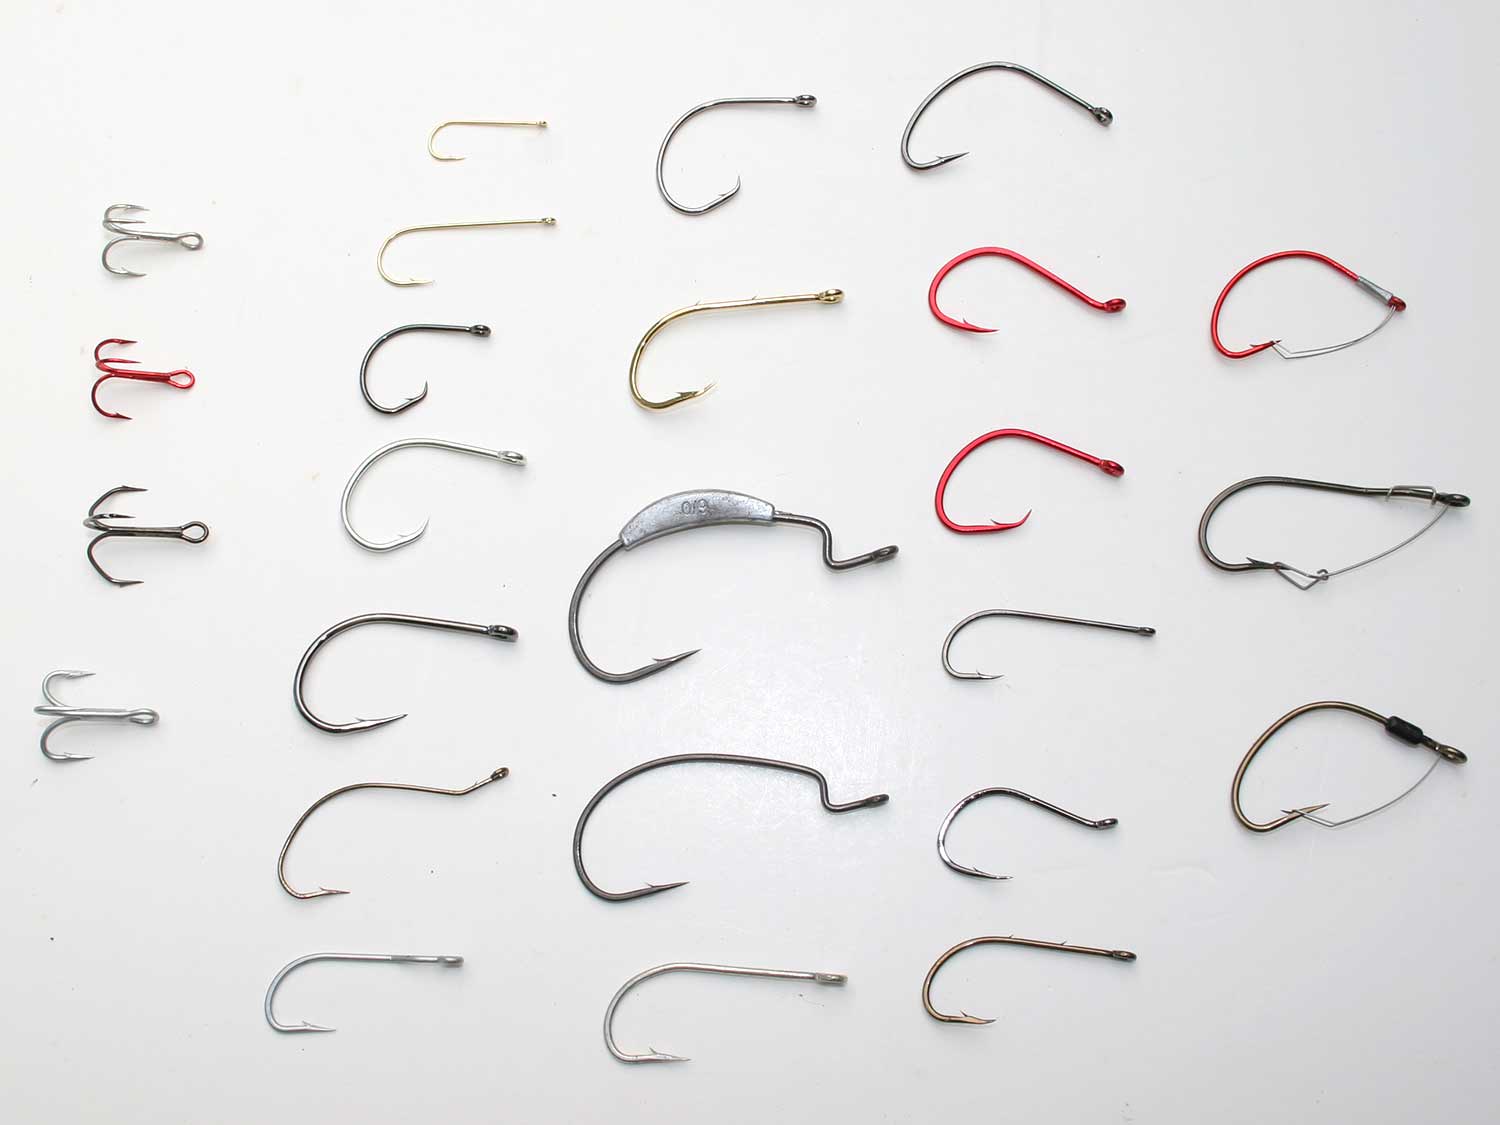 How To Choose The Right Fishing Hook The First Time Outdoor, 47% OFF